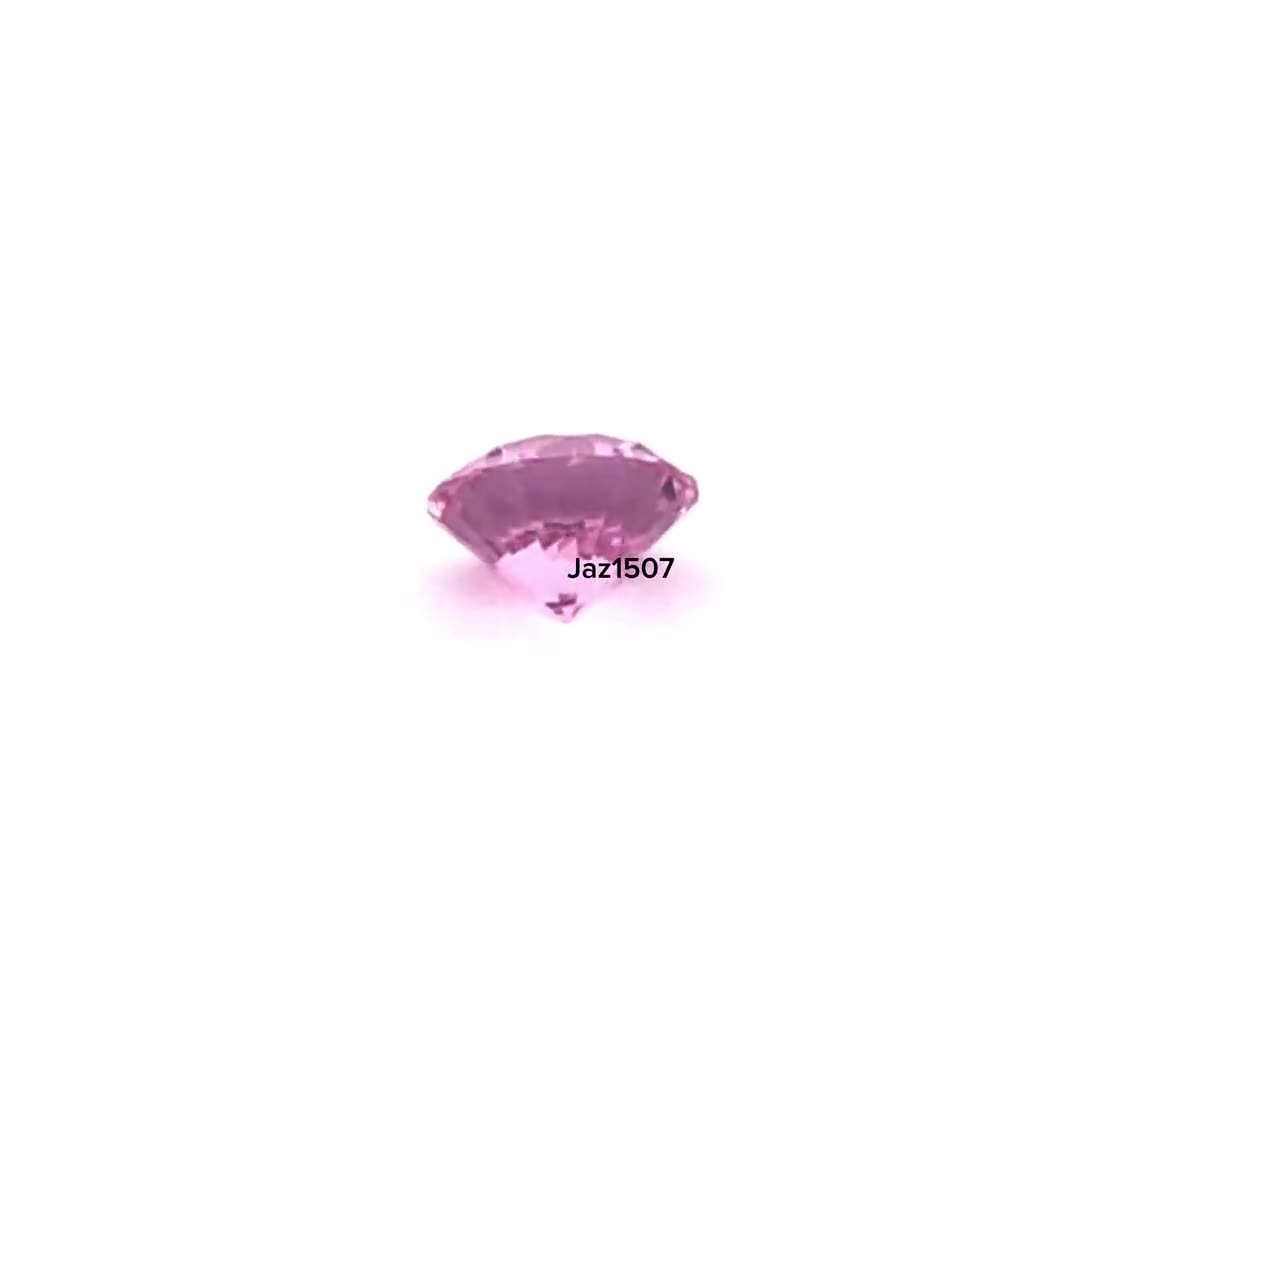 Rose Pink CZ Diamond AAA Stones, Round Faceted Cubic Zirconia Crystal  Diamond Loose Stones, Luxury Jewelry Making Stones (1mm - 15mm)